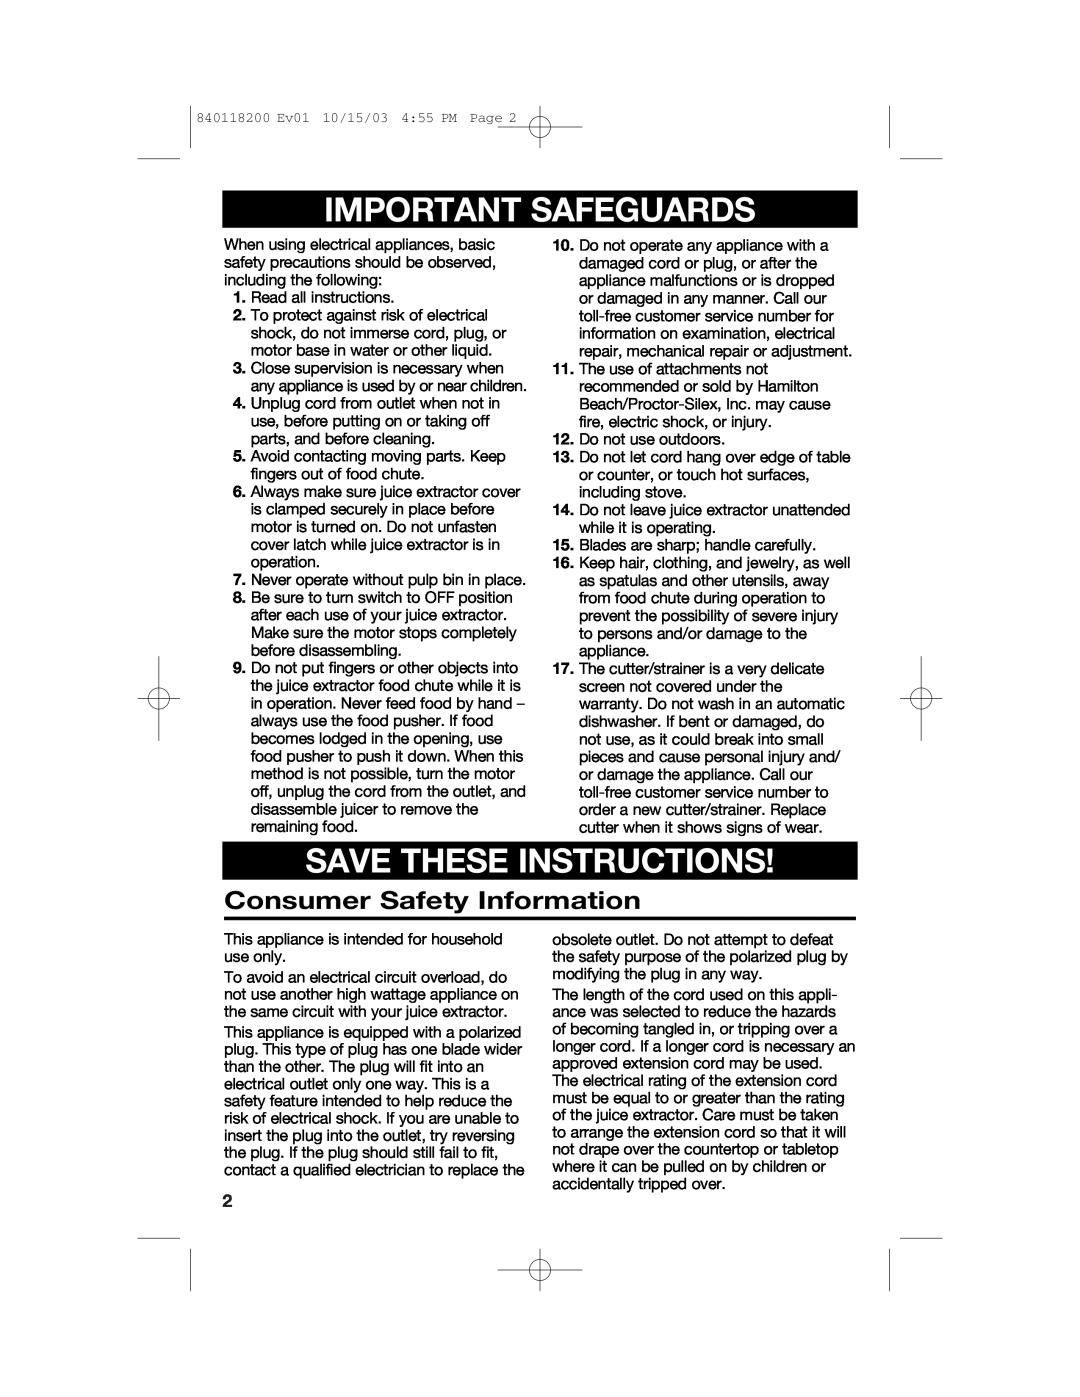 Hamilton Beach 67900 manual Important Safeguards, Save These Instructions, Consumer Safety Information 